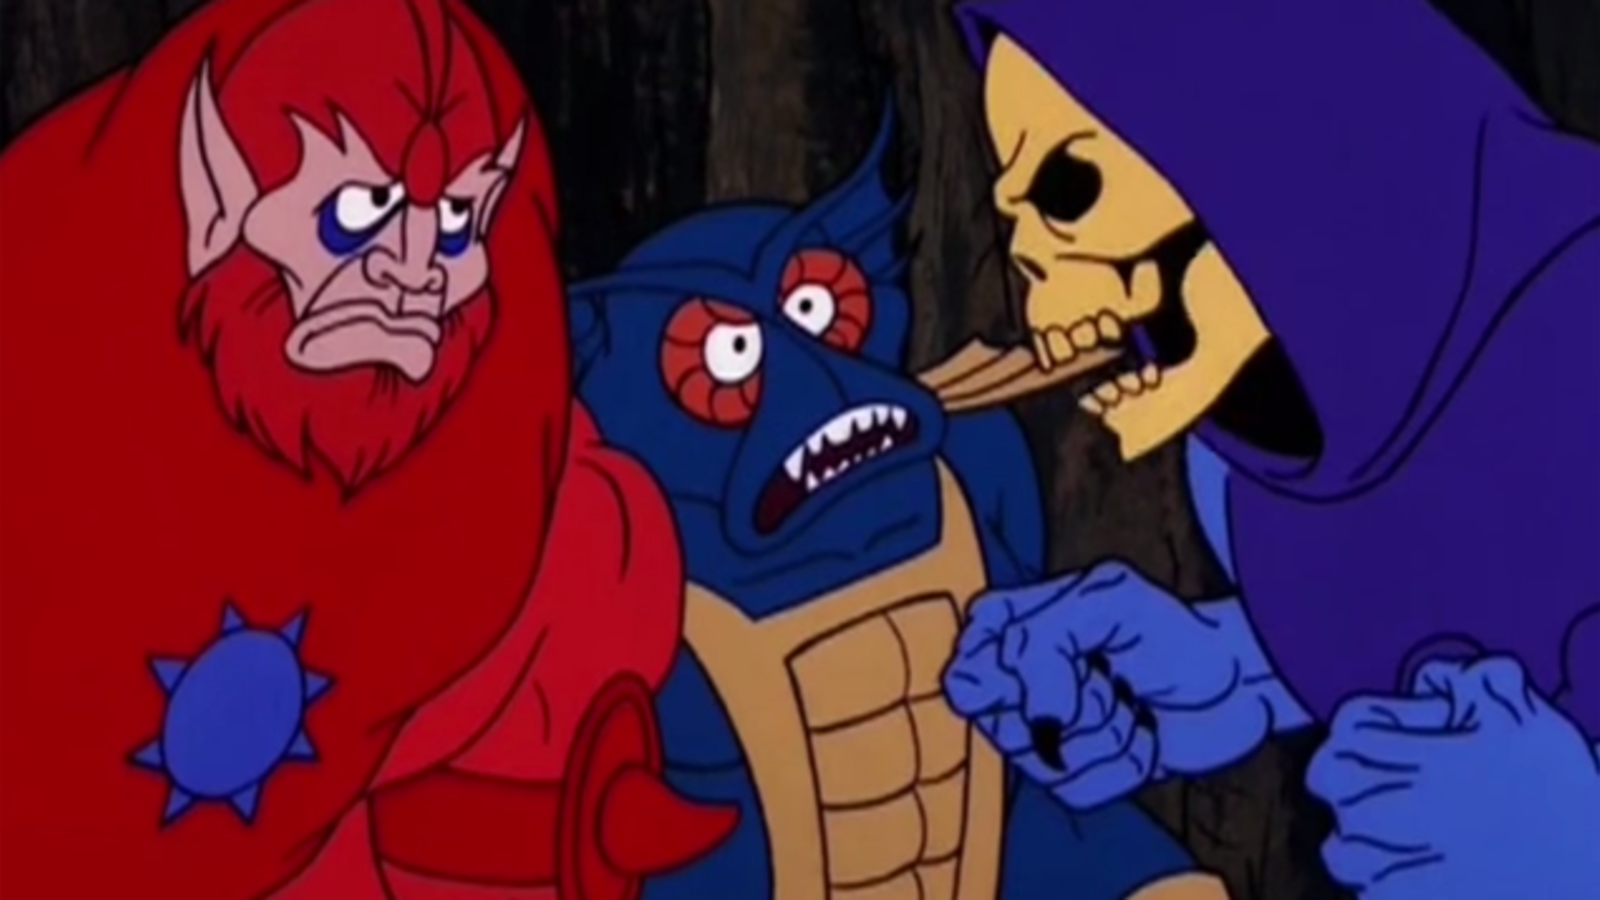 skeletor insulting his minions